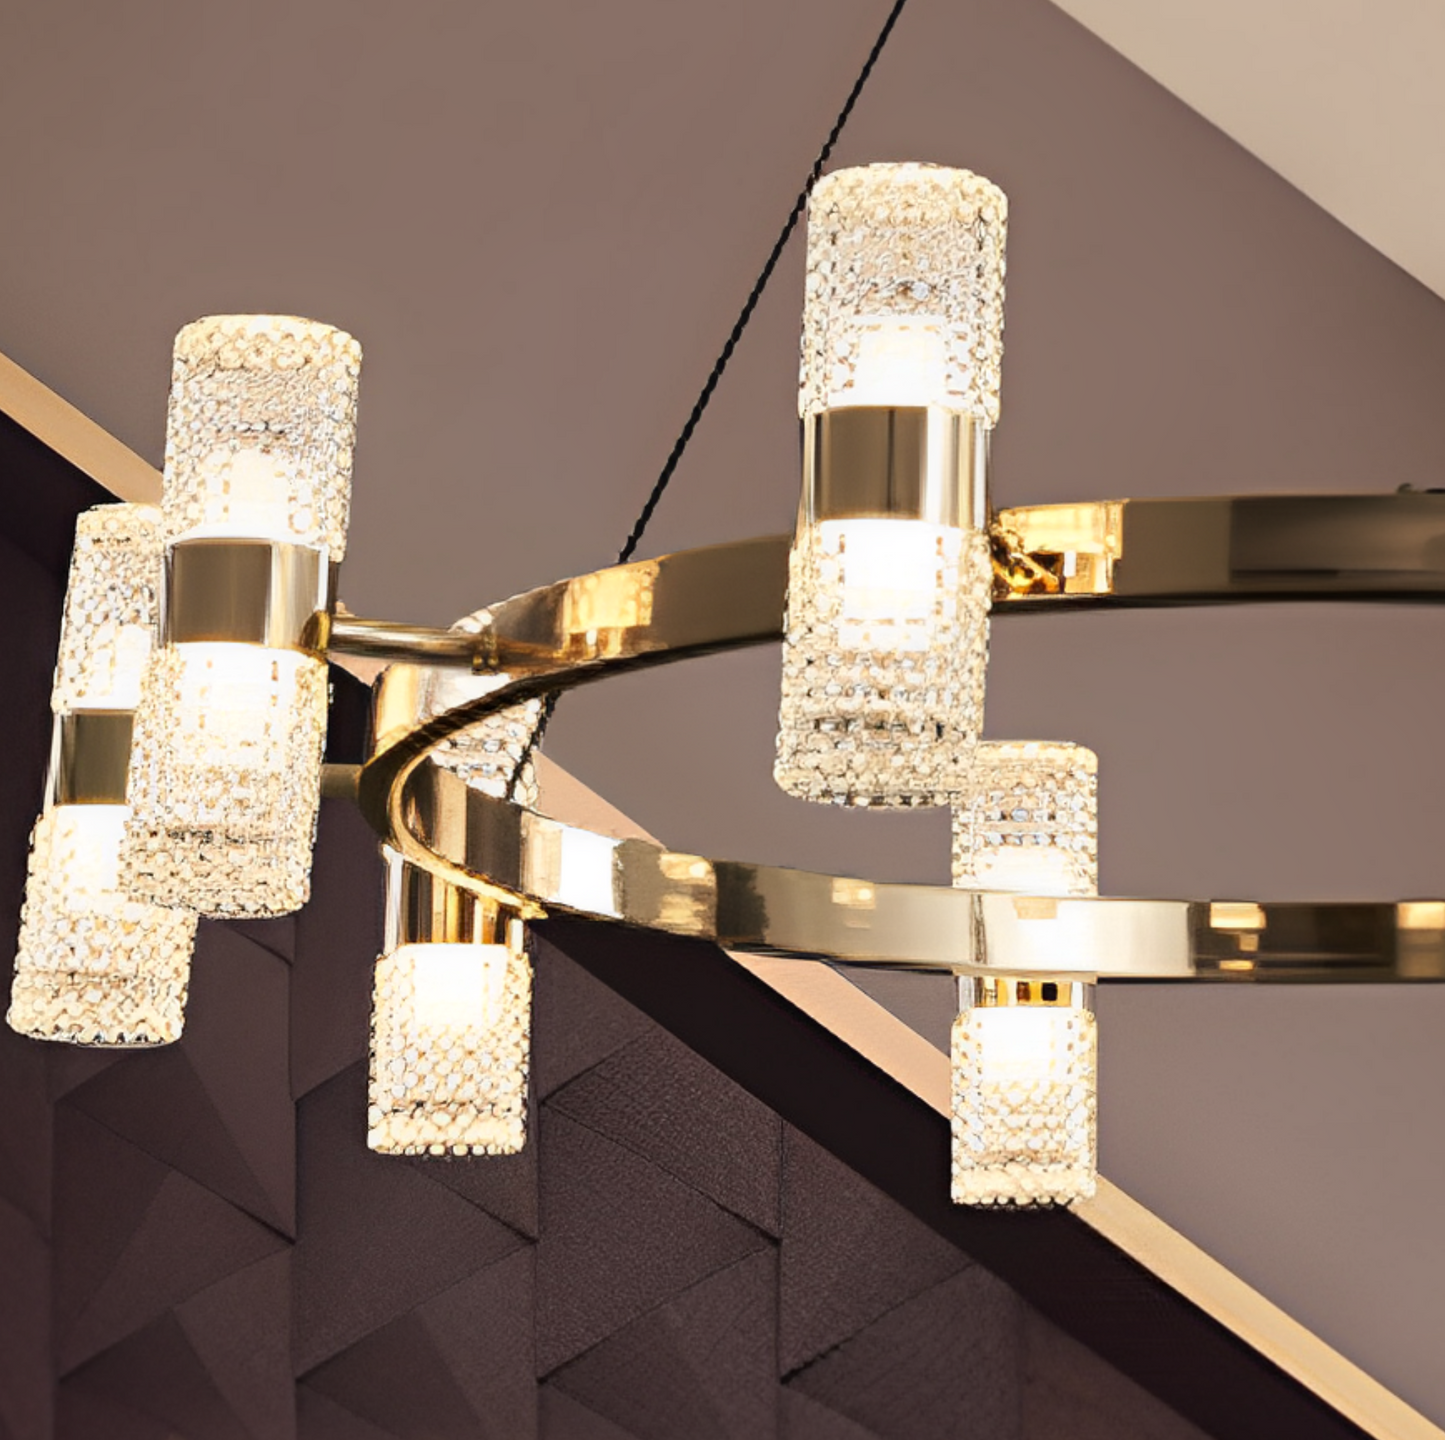 Load image into Gallery viewer, Aluminium Acrylic Led Crystal Chandelier by Gloss (P0715-10A)
